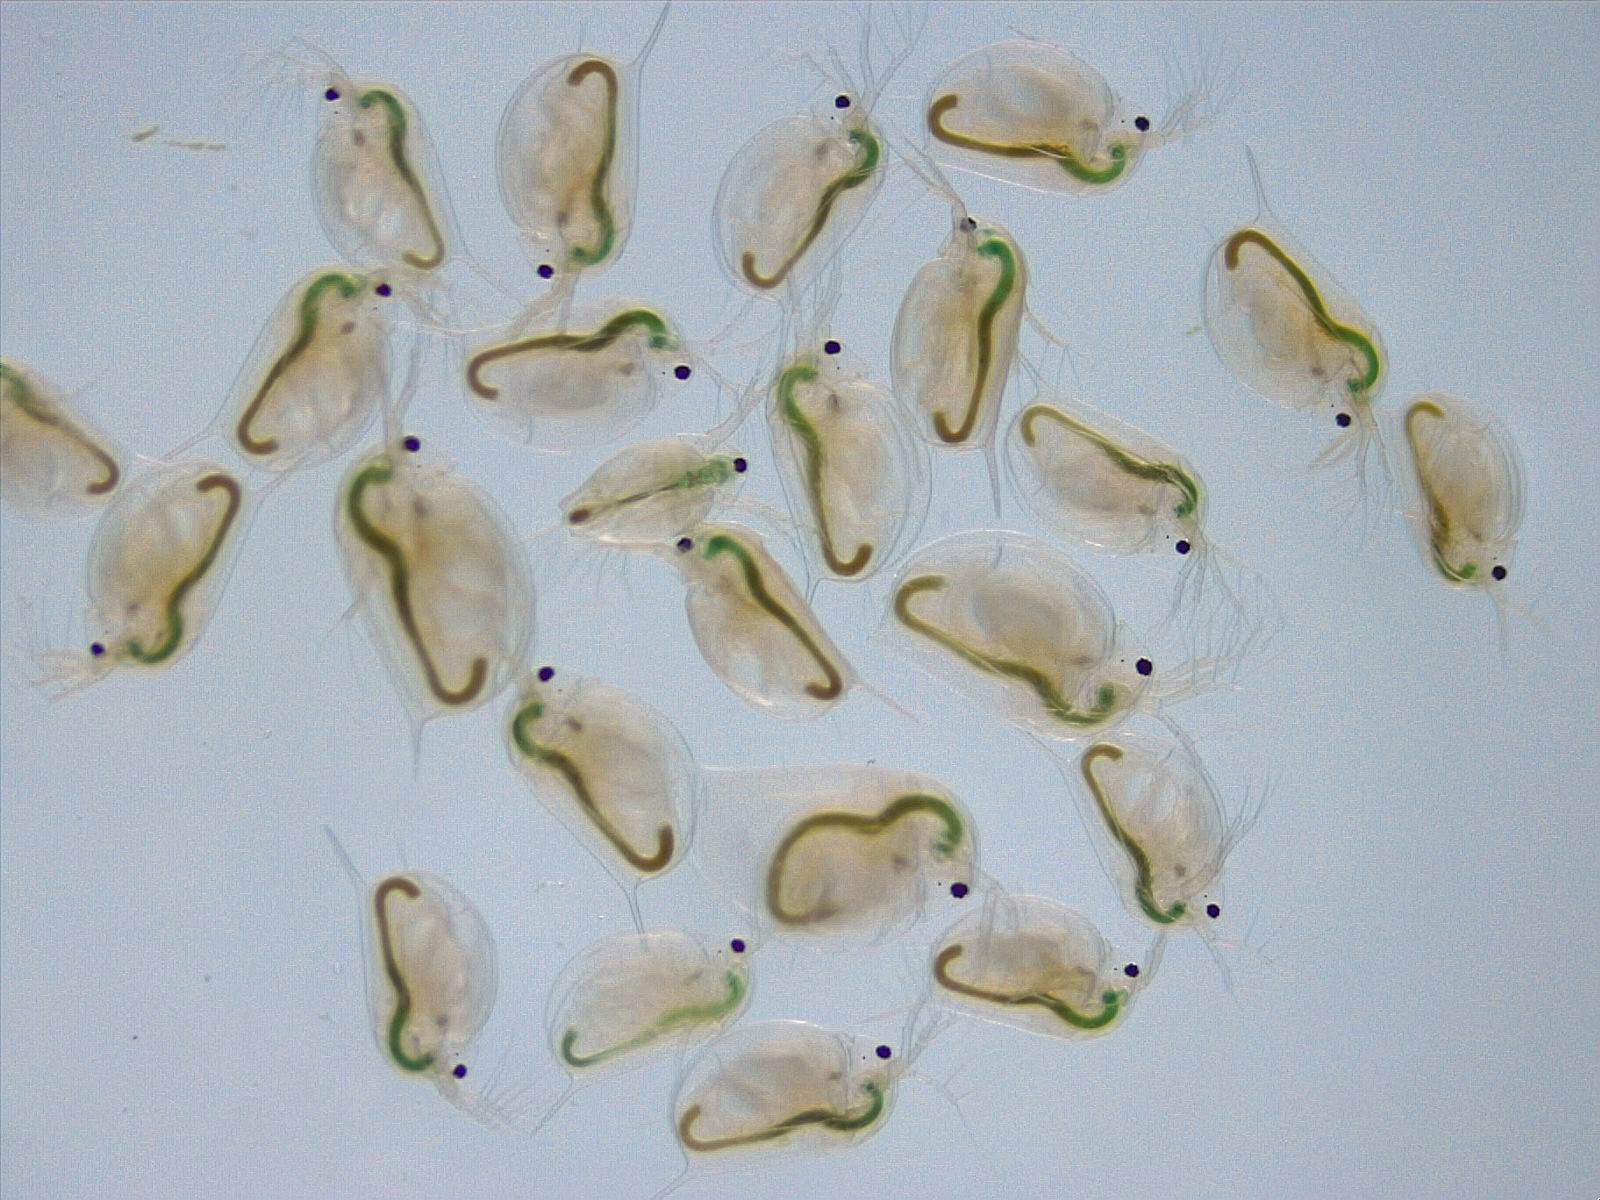 daphnia toxicity test_OECD 202_IS0 6341